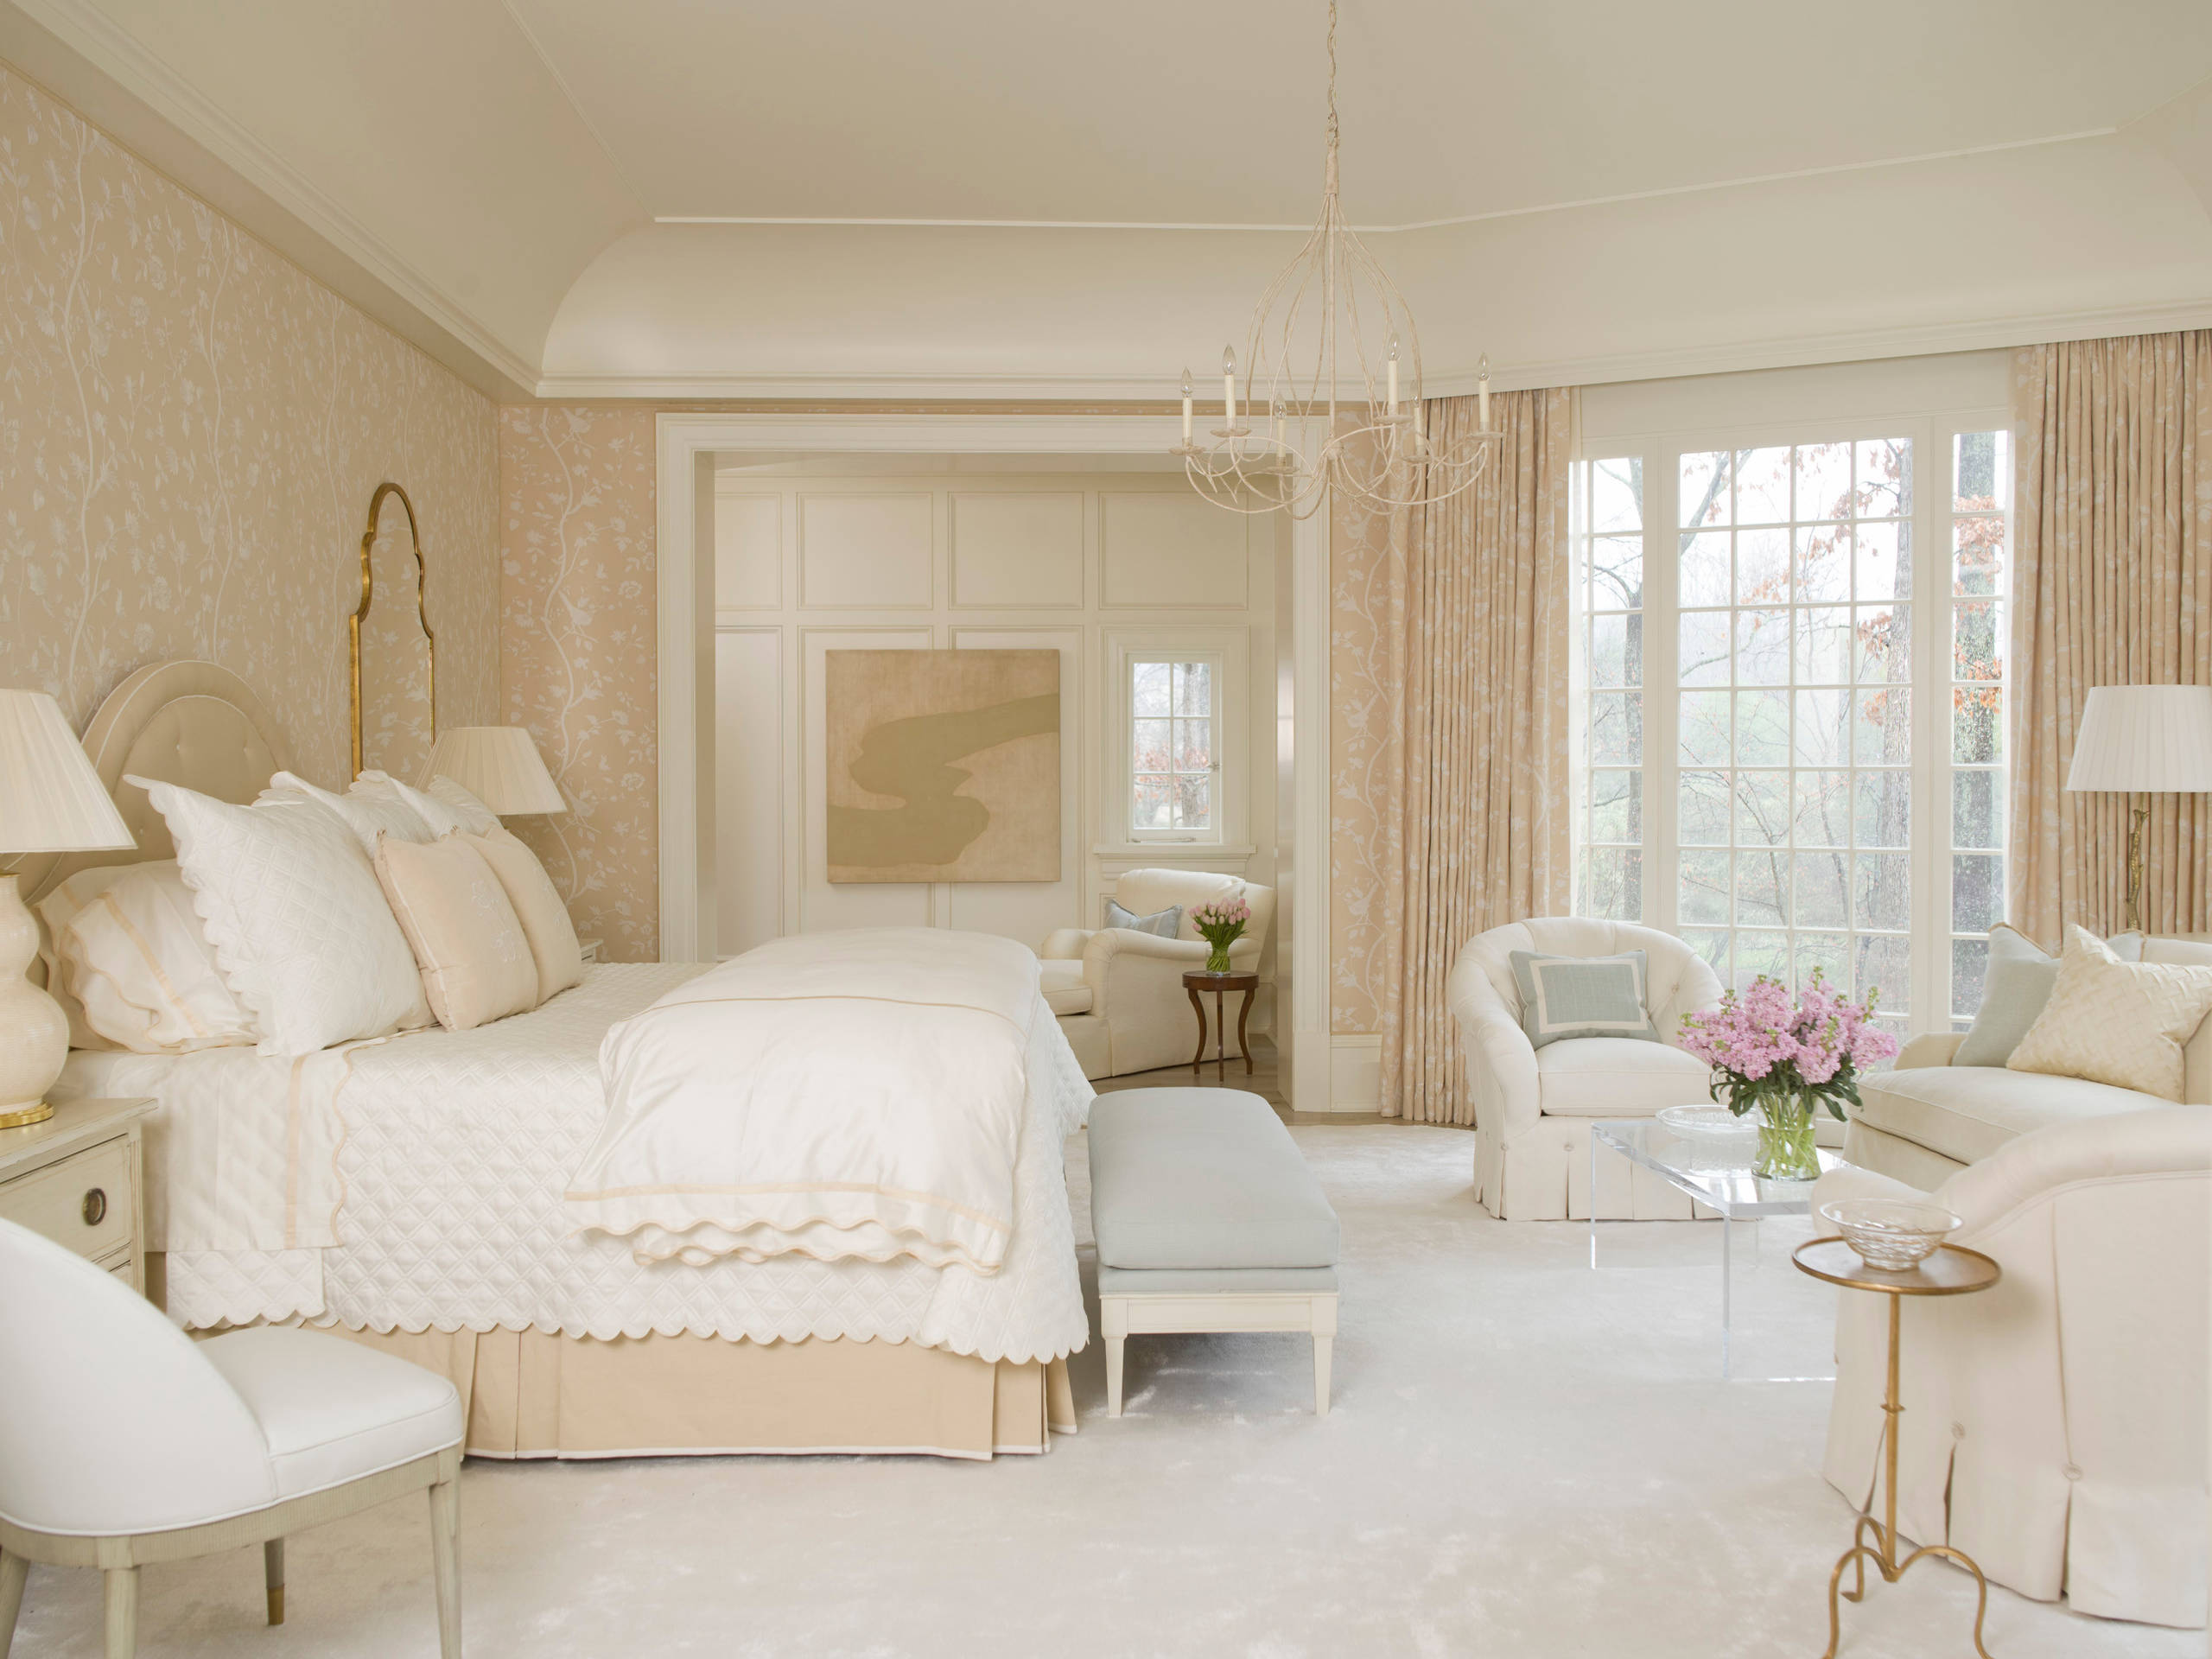 Traditional and classic bedroom featured in home tour